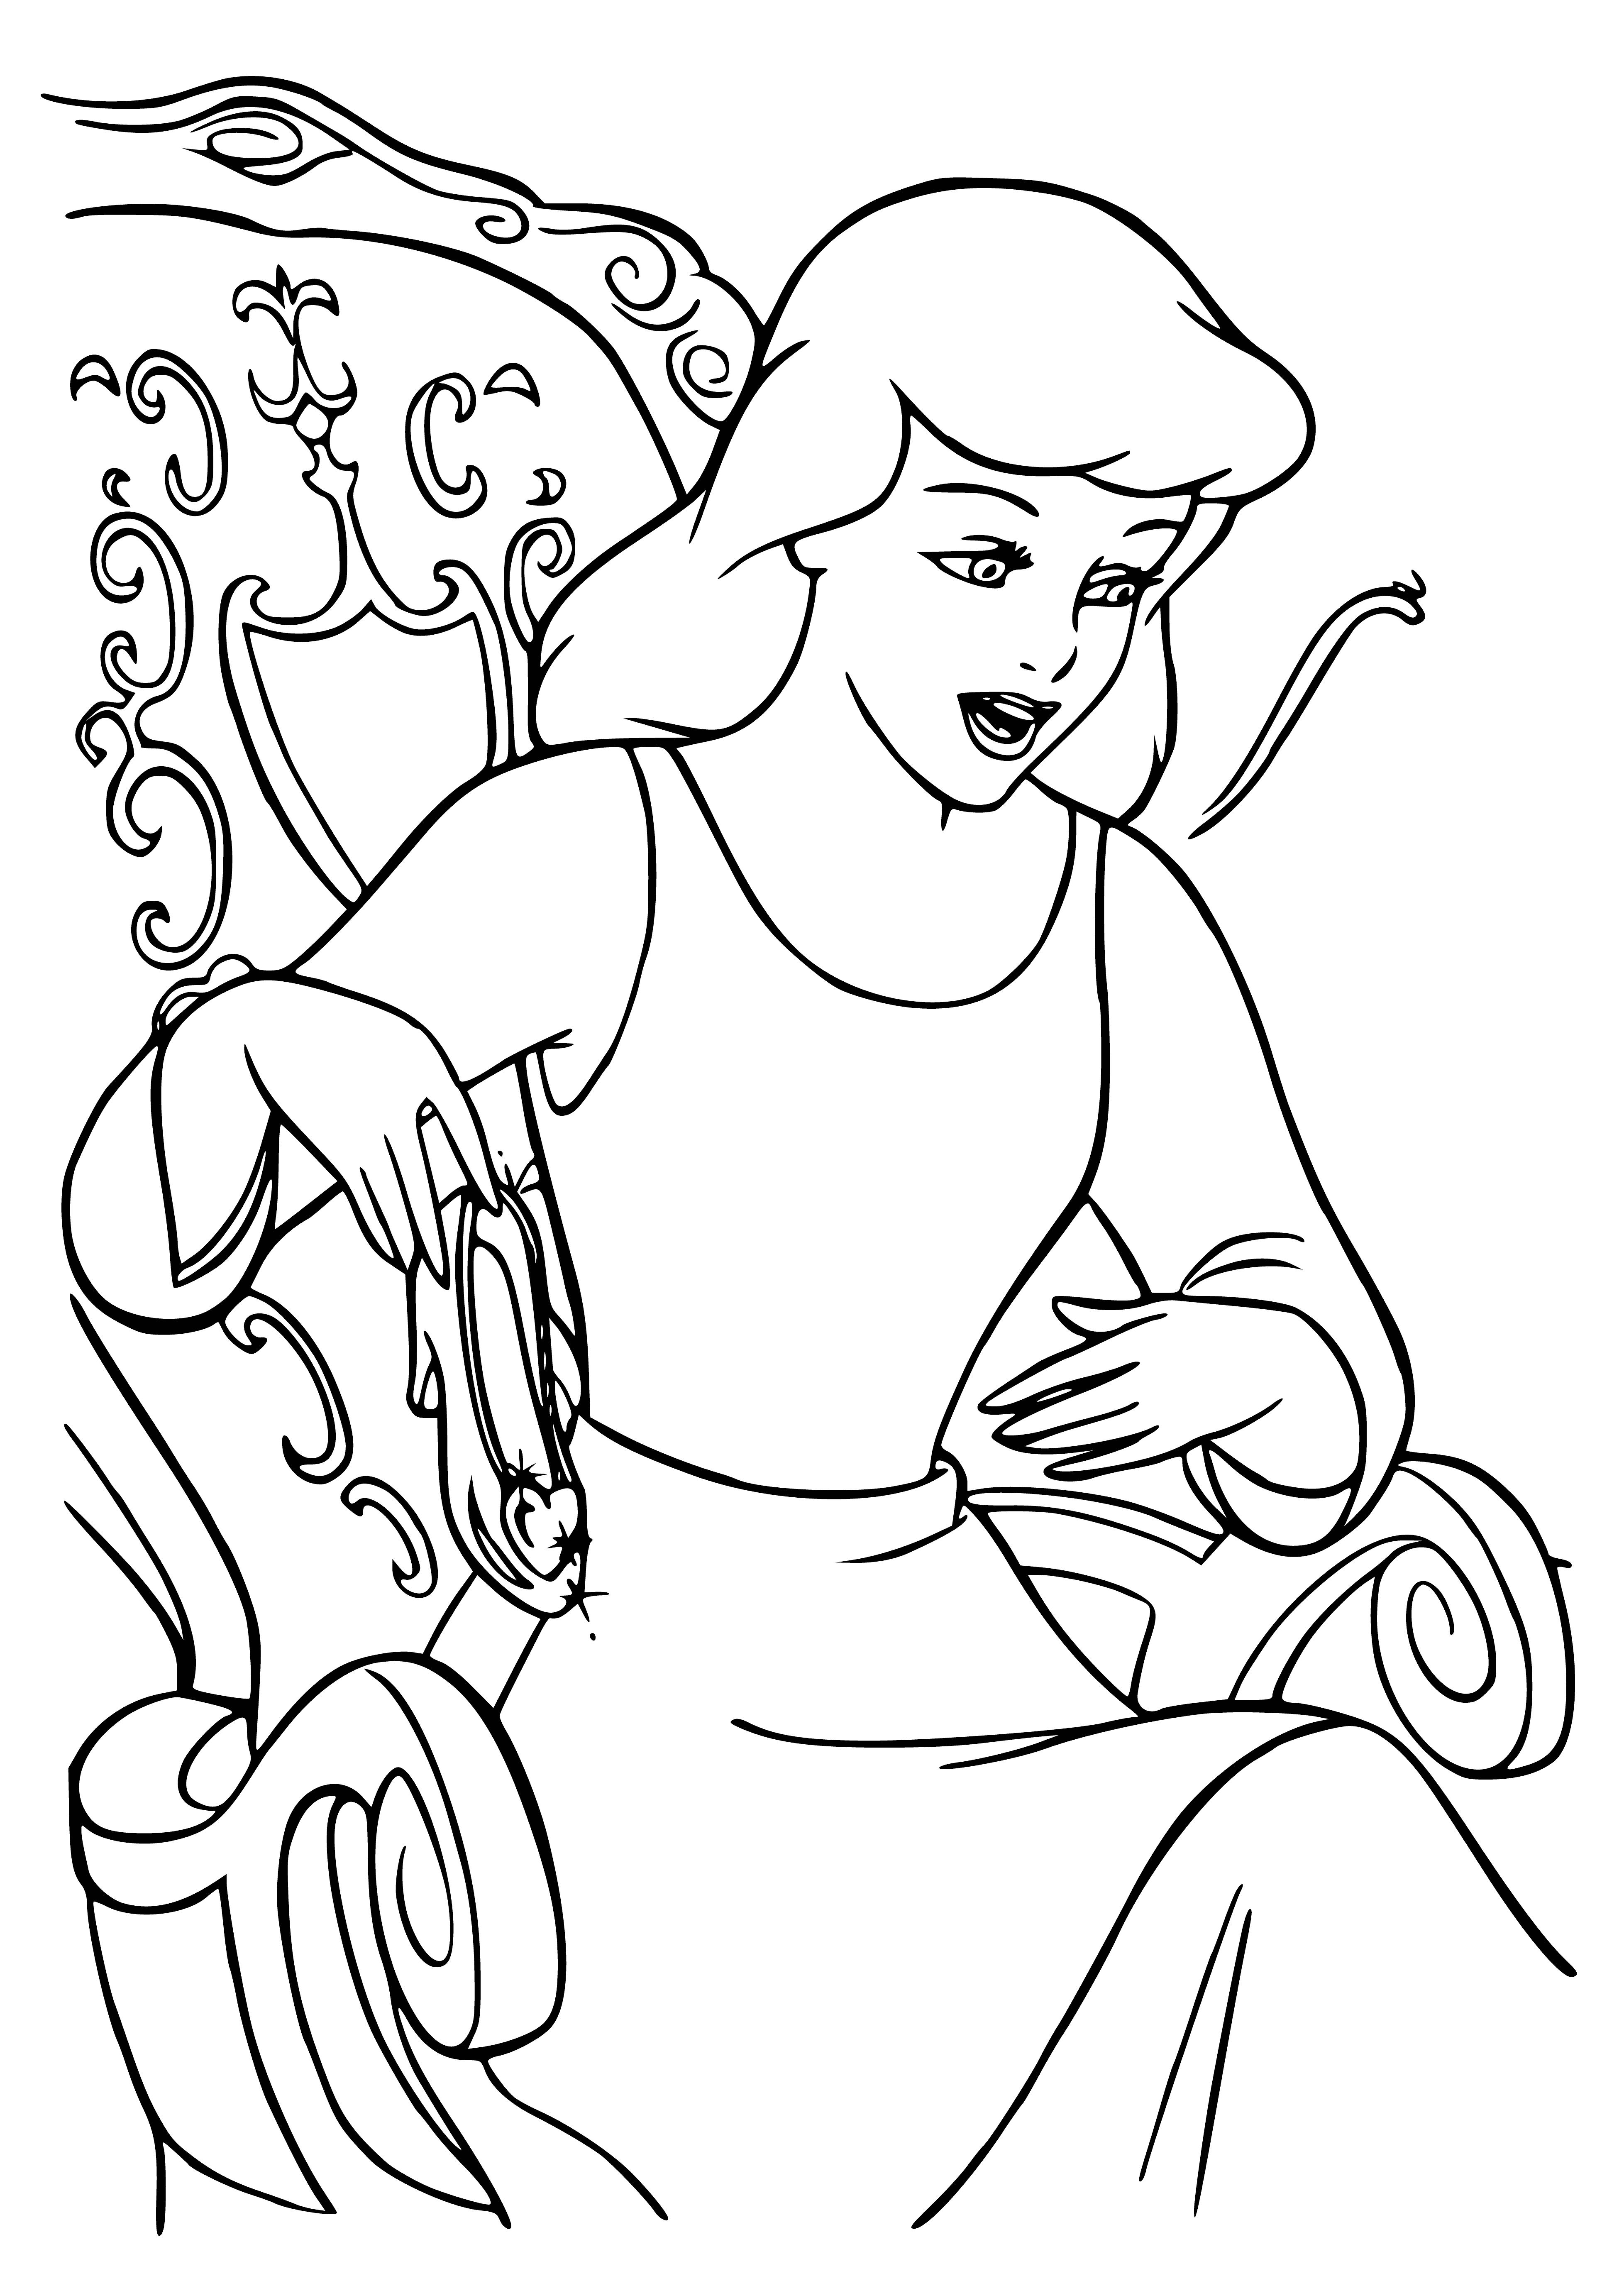 coloring page: A delicate pale blue glass slipper with a thin and graceful stem, clearly well-crafted.